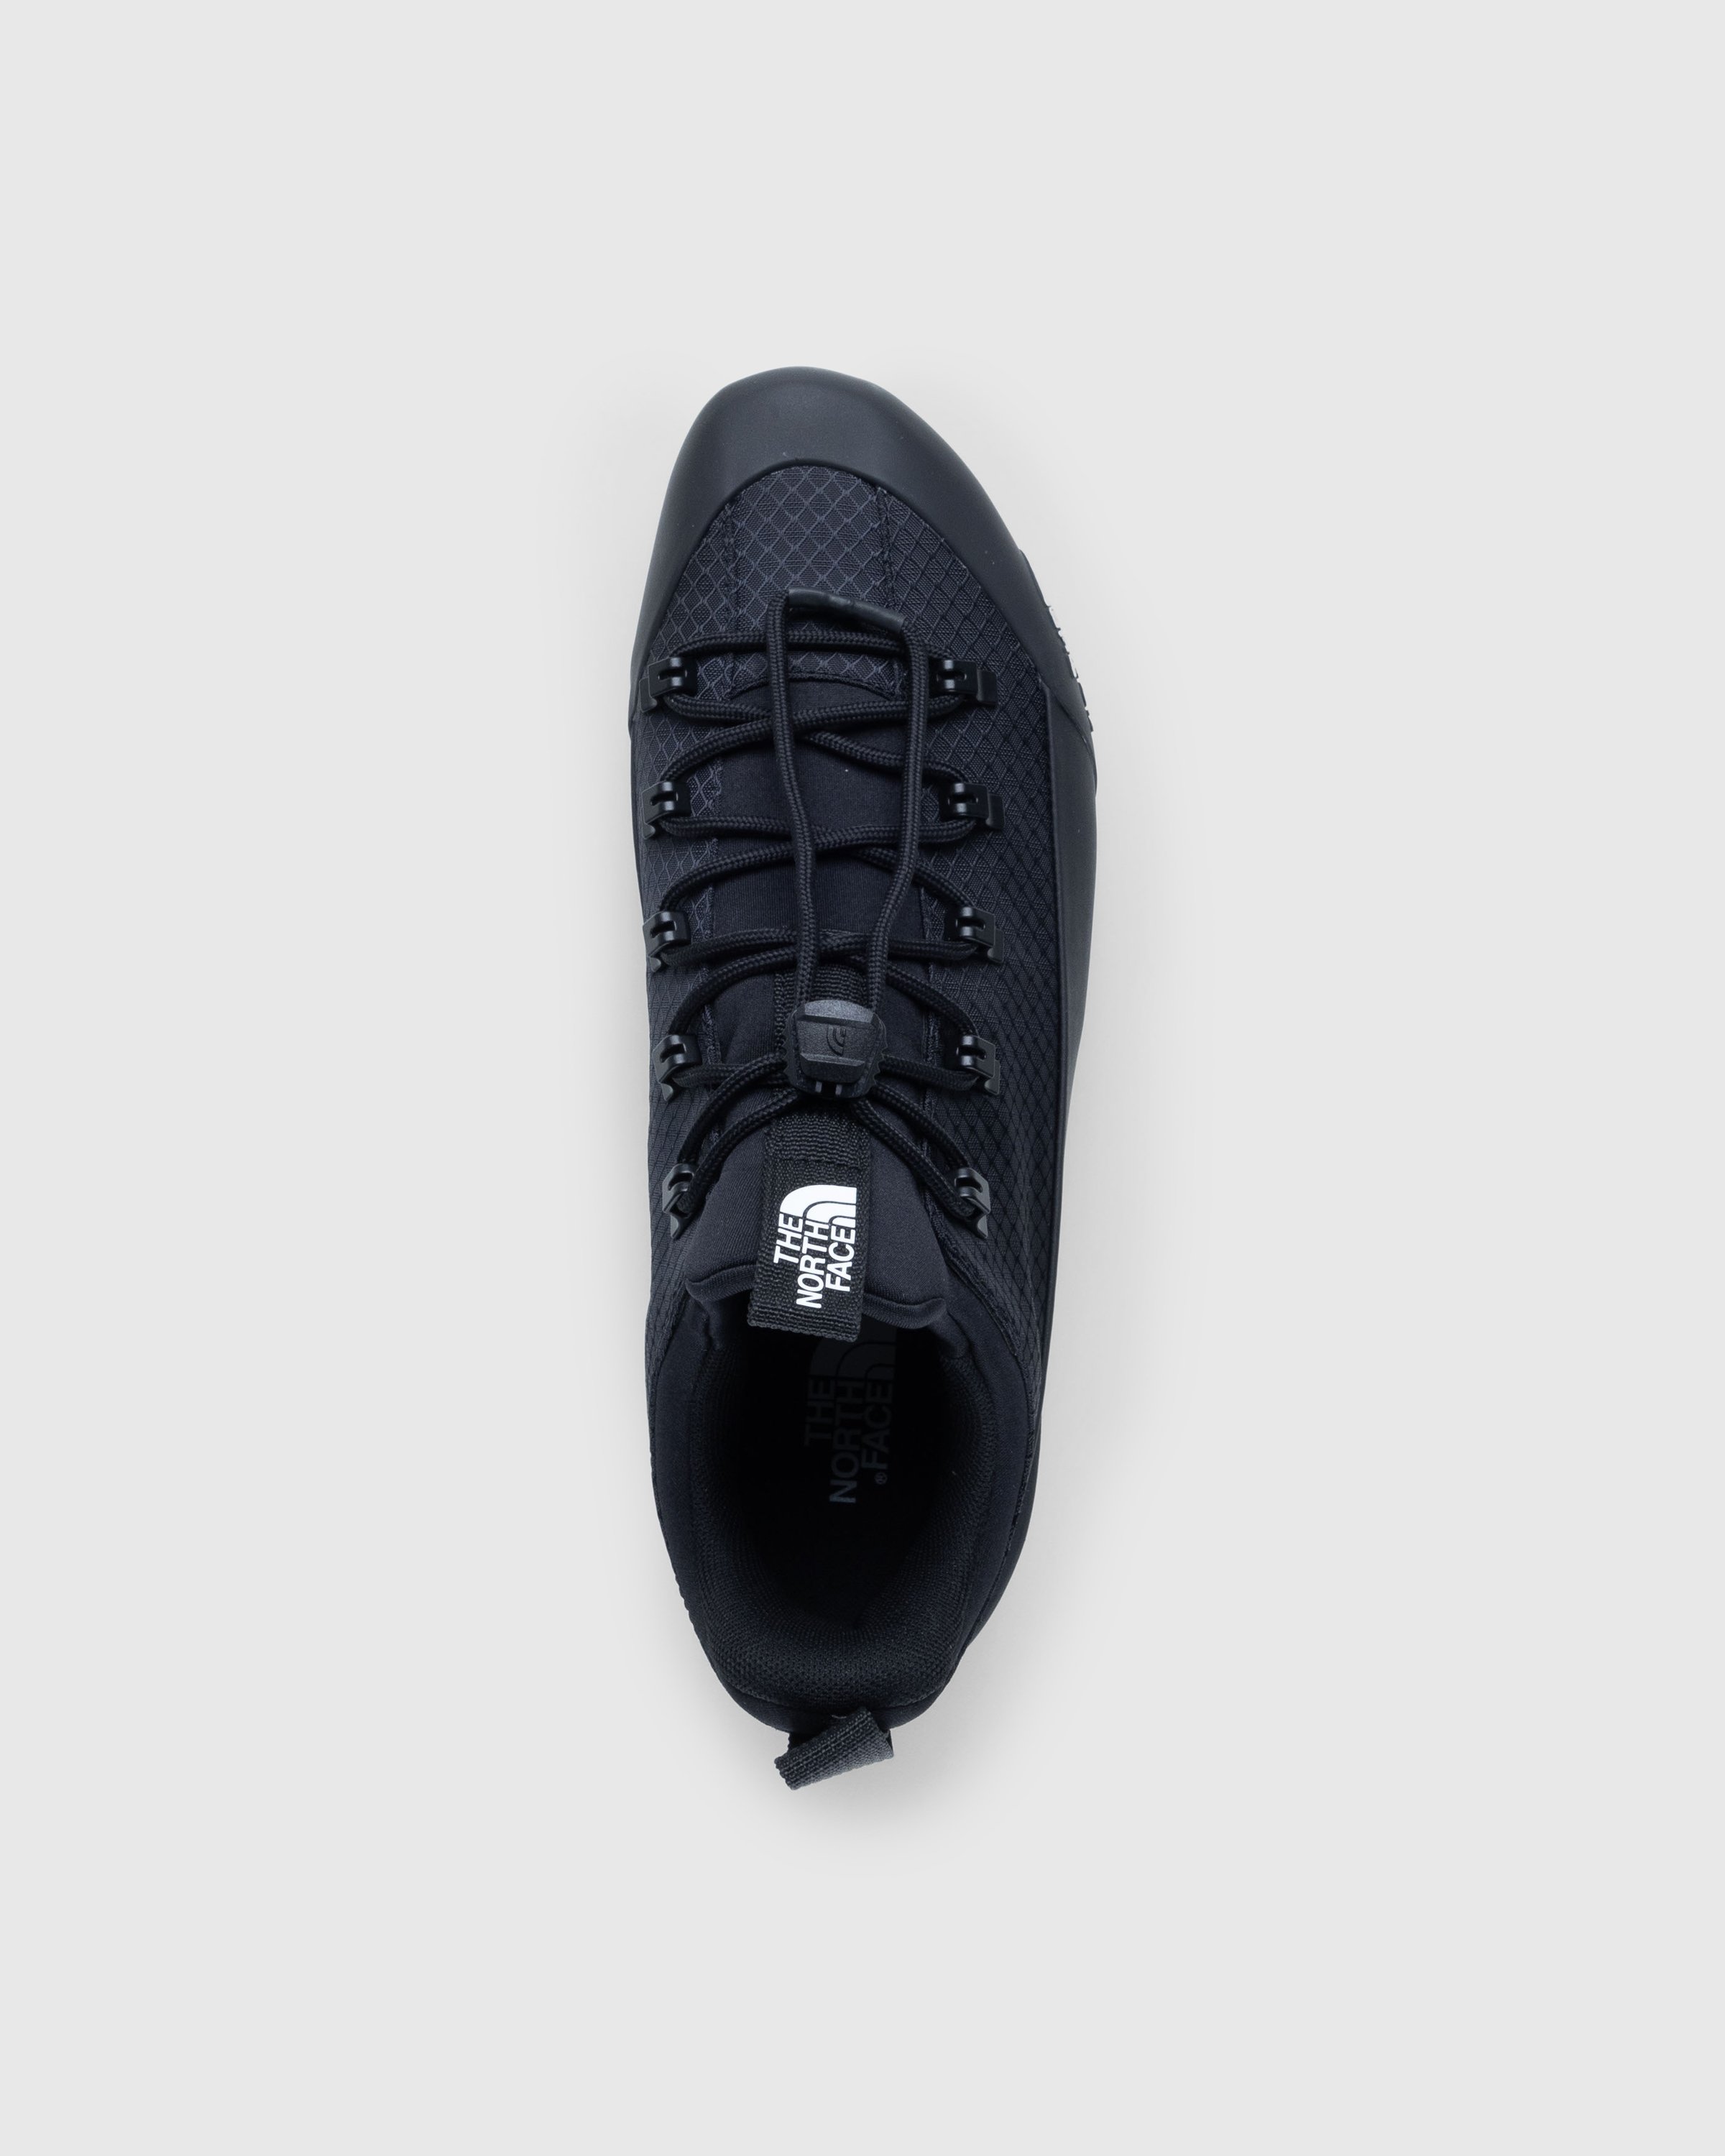 The North Face - Glenclyffe Low Black - Footwear - Black - Image 5